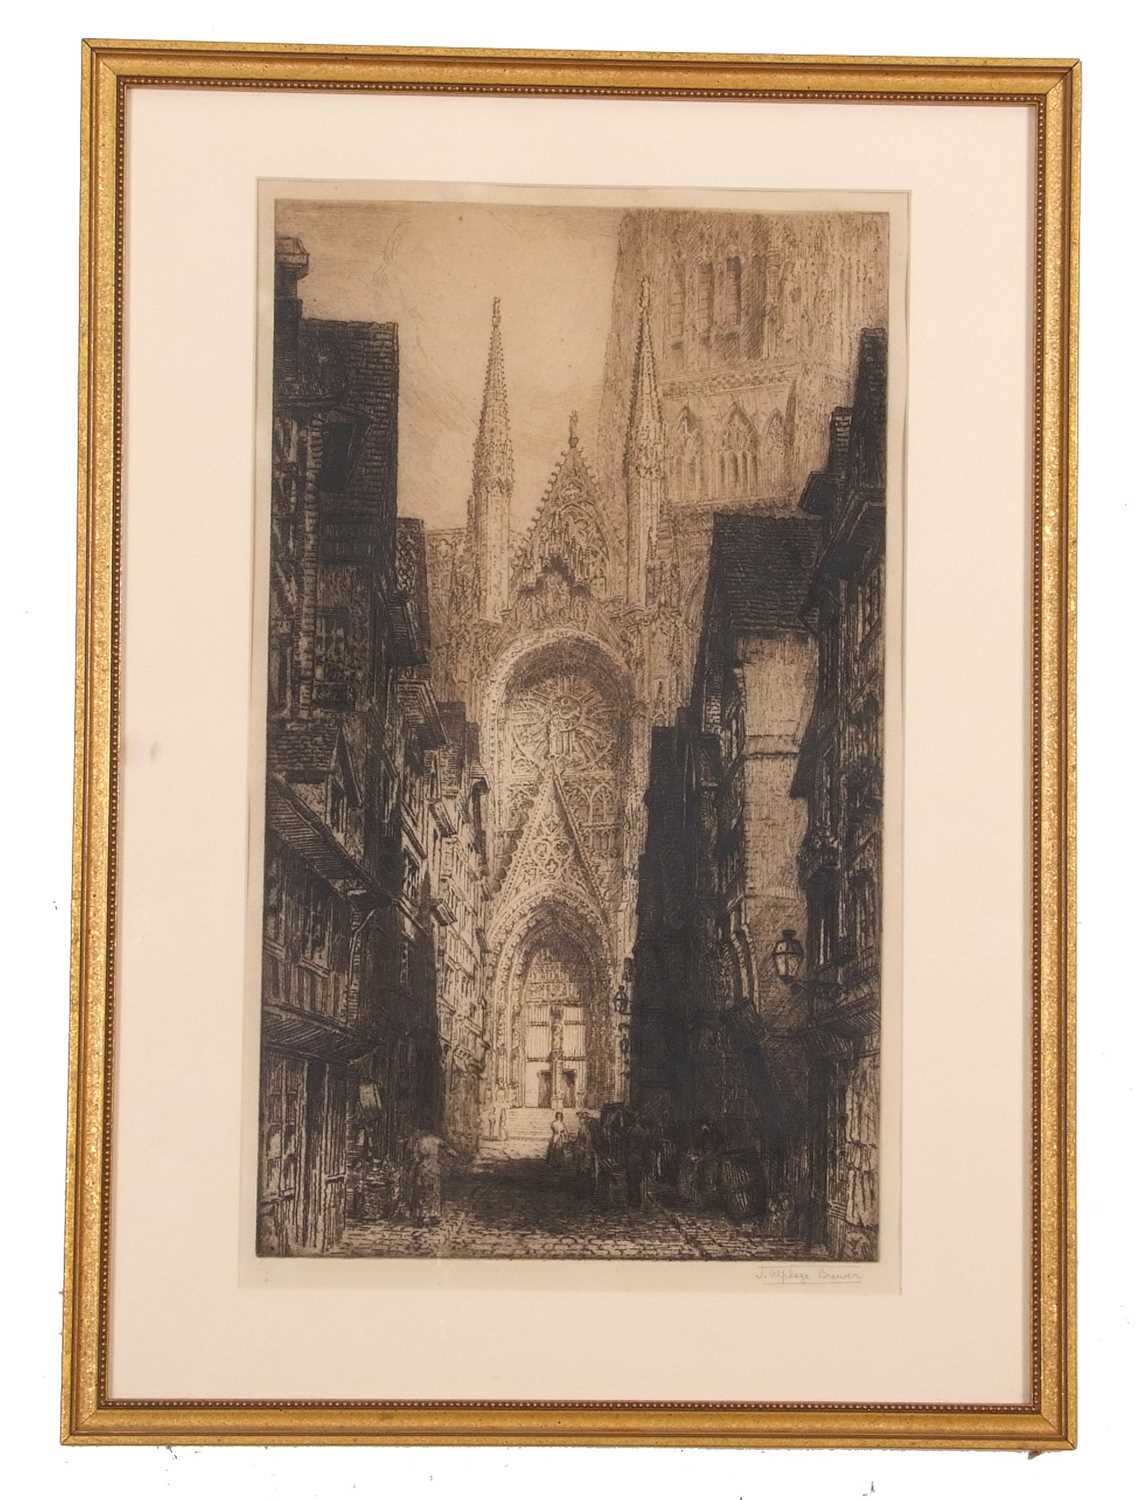 James Alphege Brewer (British,1881-1946), inscribed on verso: "Continental Cathedral Ediface -